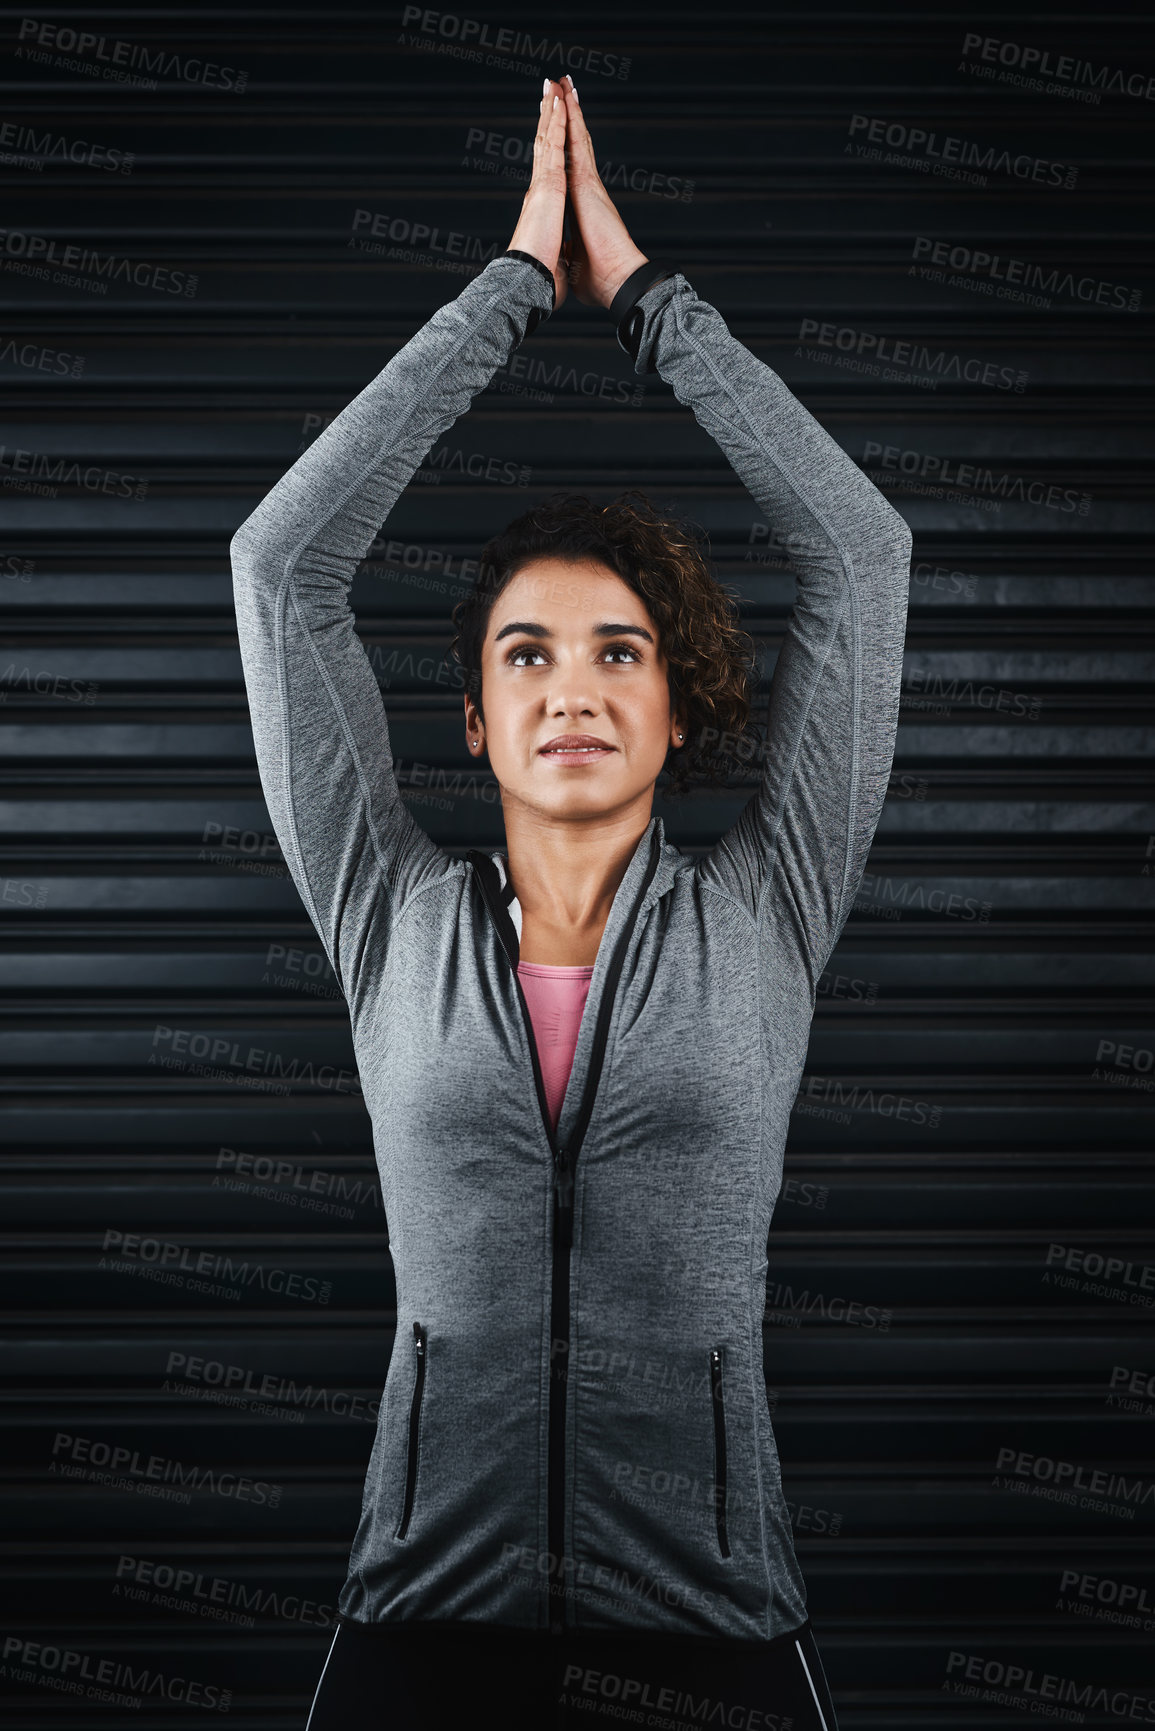 Buy stock photo Cropped shot of a young attractive woman standing against a black background with her arms raised in a yoga position